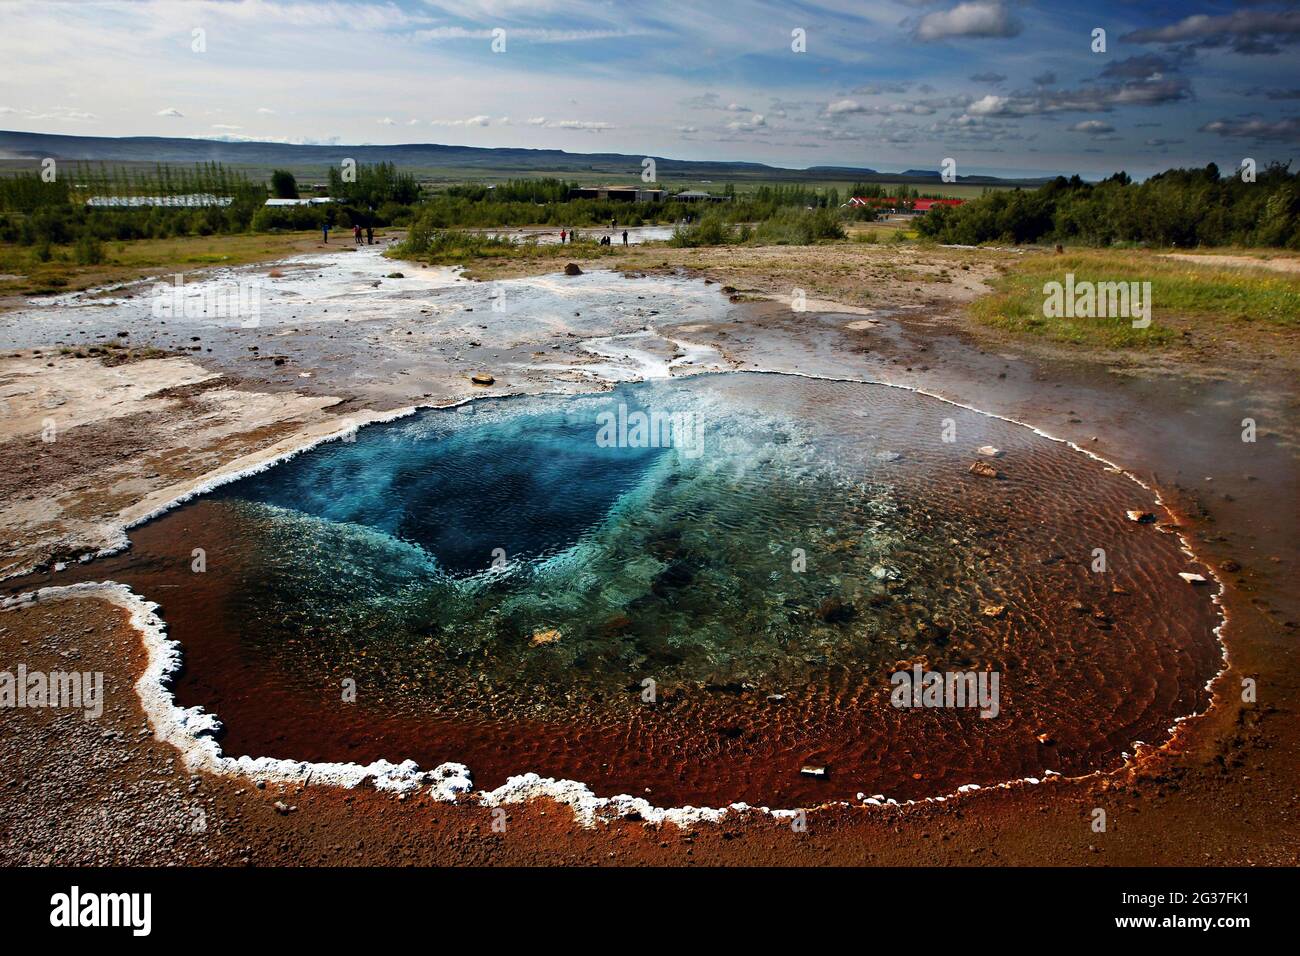 Geyser, Hot spring, Haukadalur, Geothermal area, Golden circle, South-West Iceland, Iceland Stock Photo